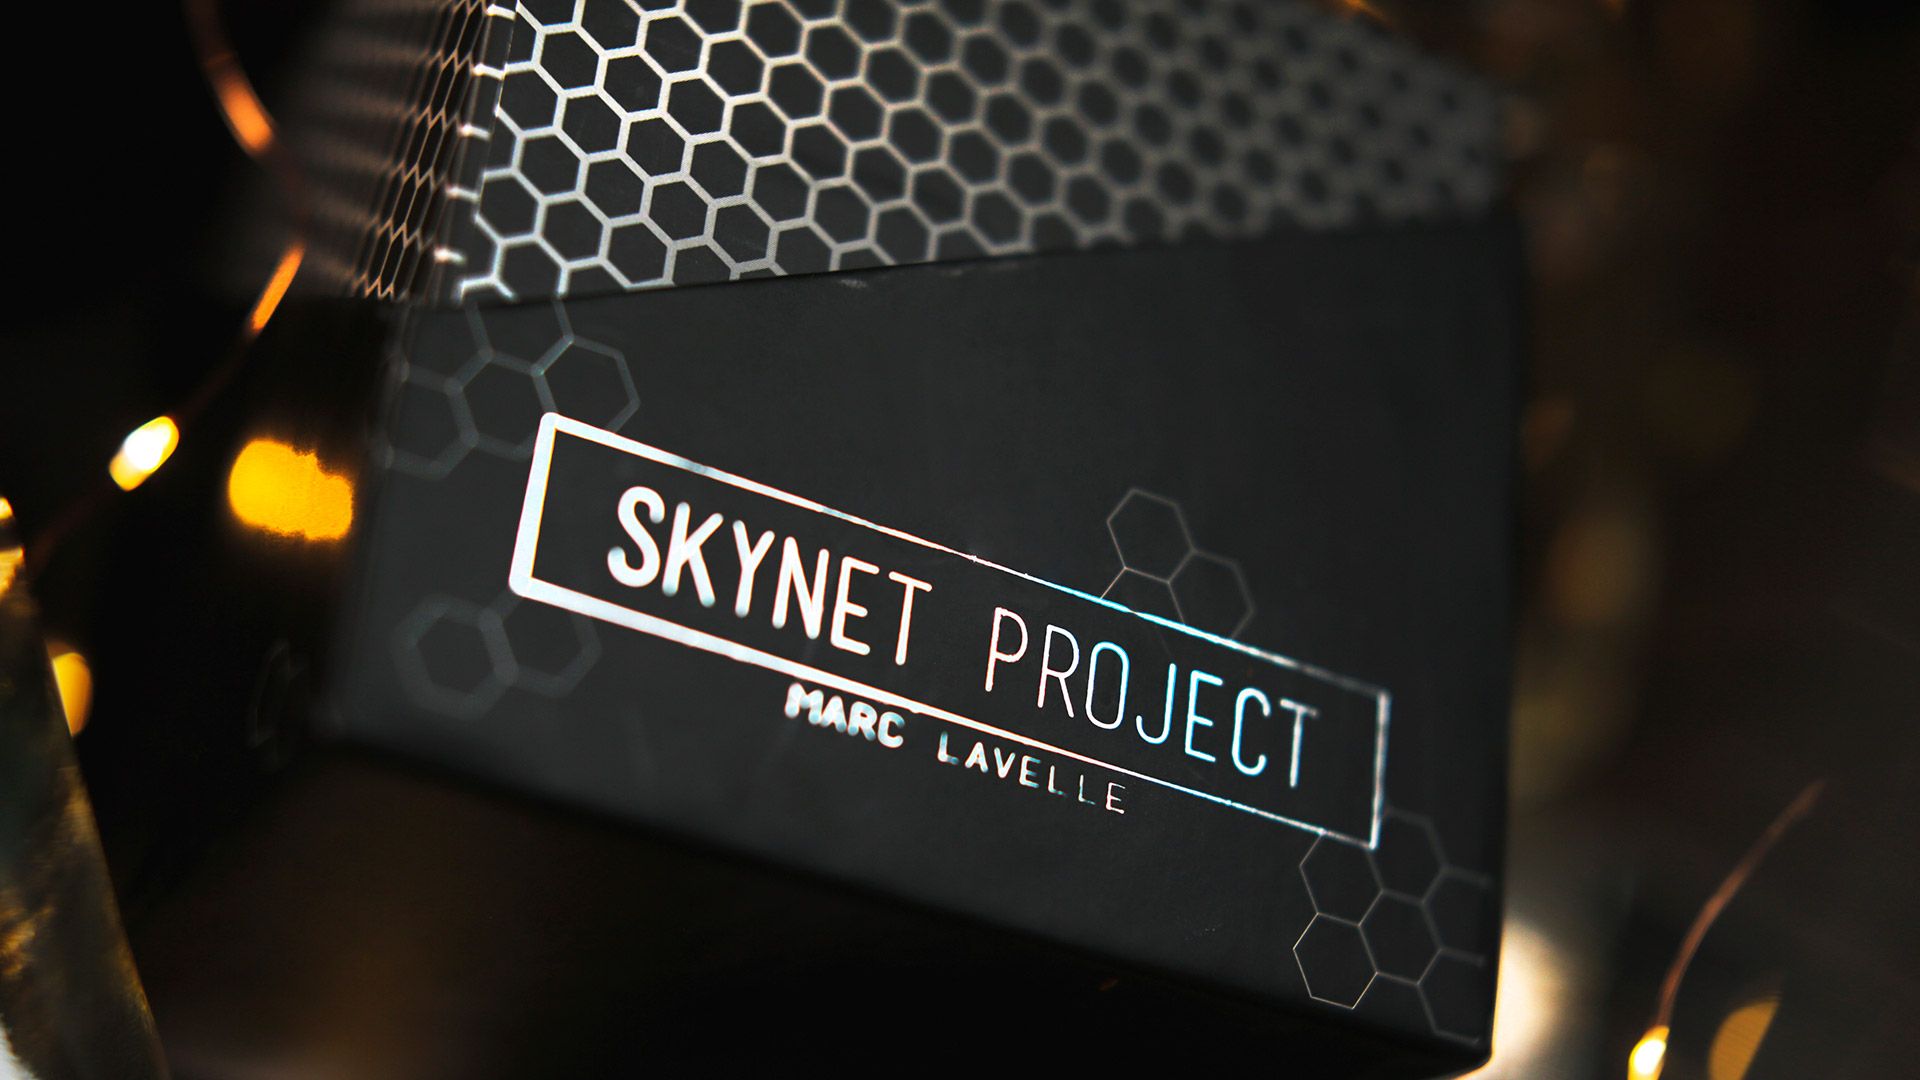 Skynet Project Signage, Download Wallpaper